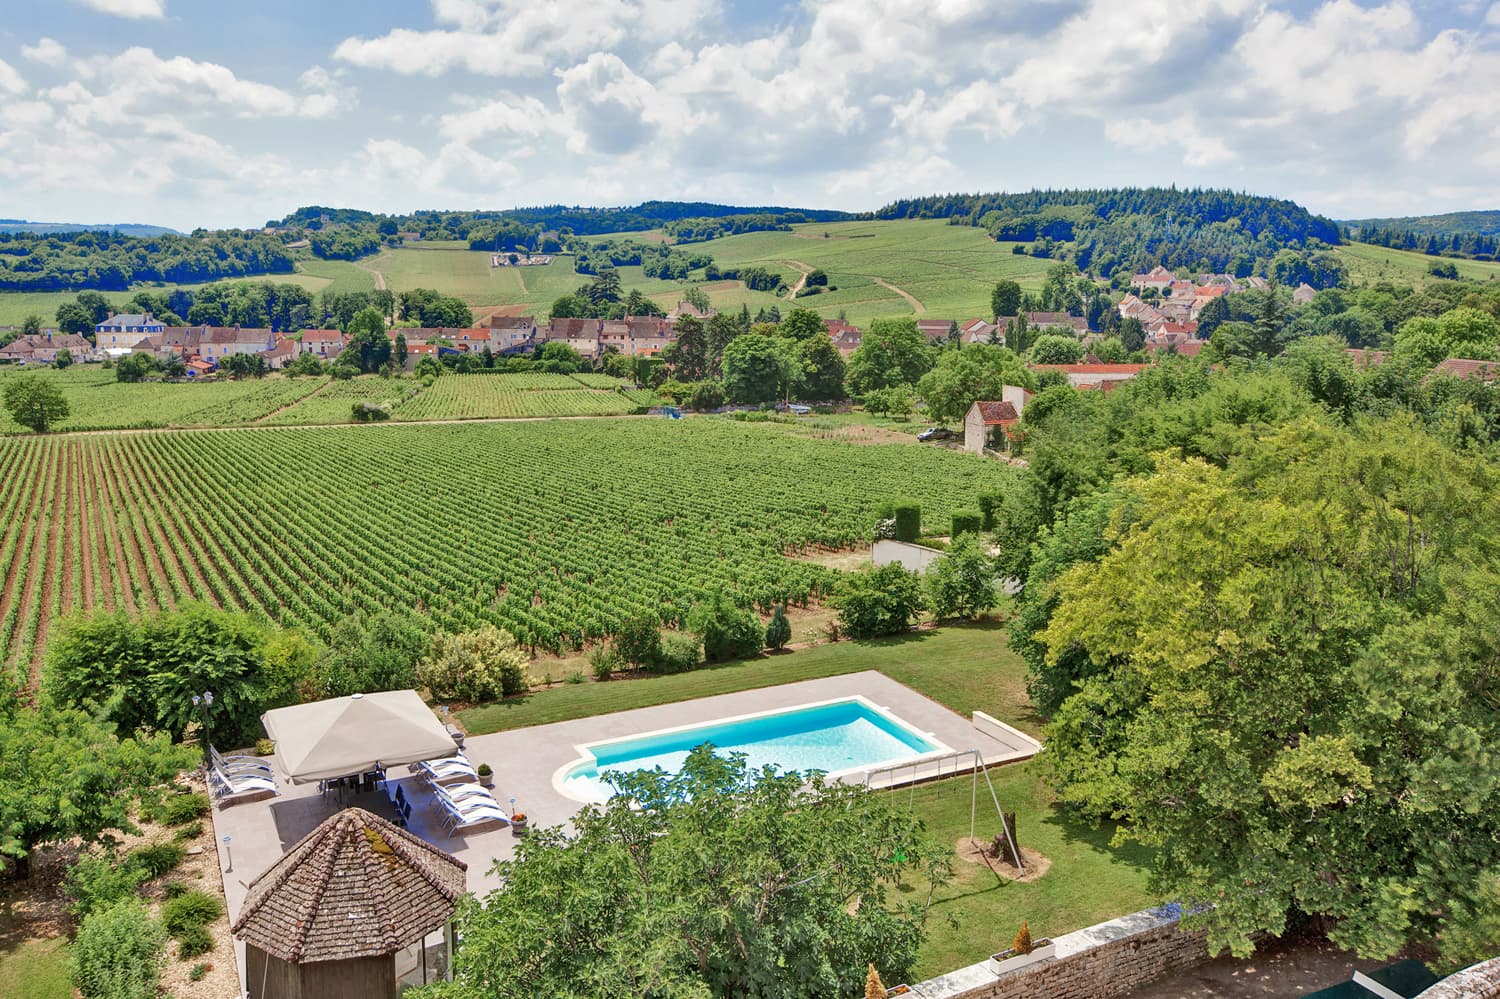 Vacation rental châteaux with private pool in Burgundy with countryside views | Château Saône